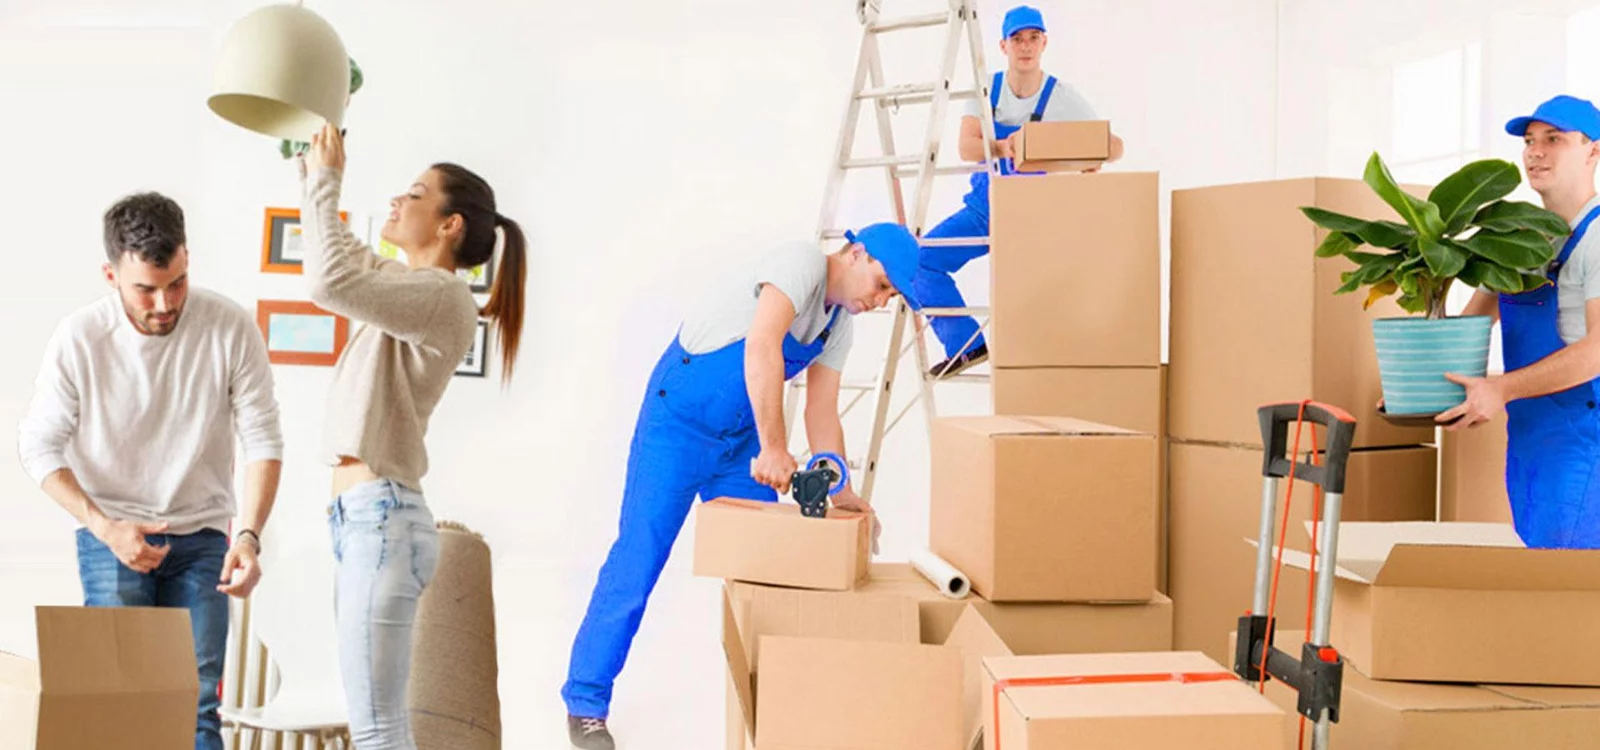 Hiring the Best Quality Moving Labor